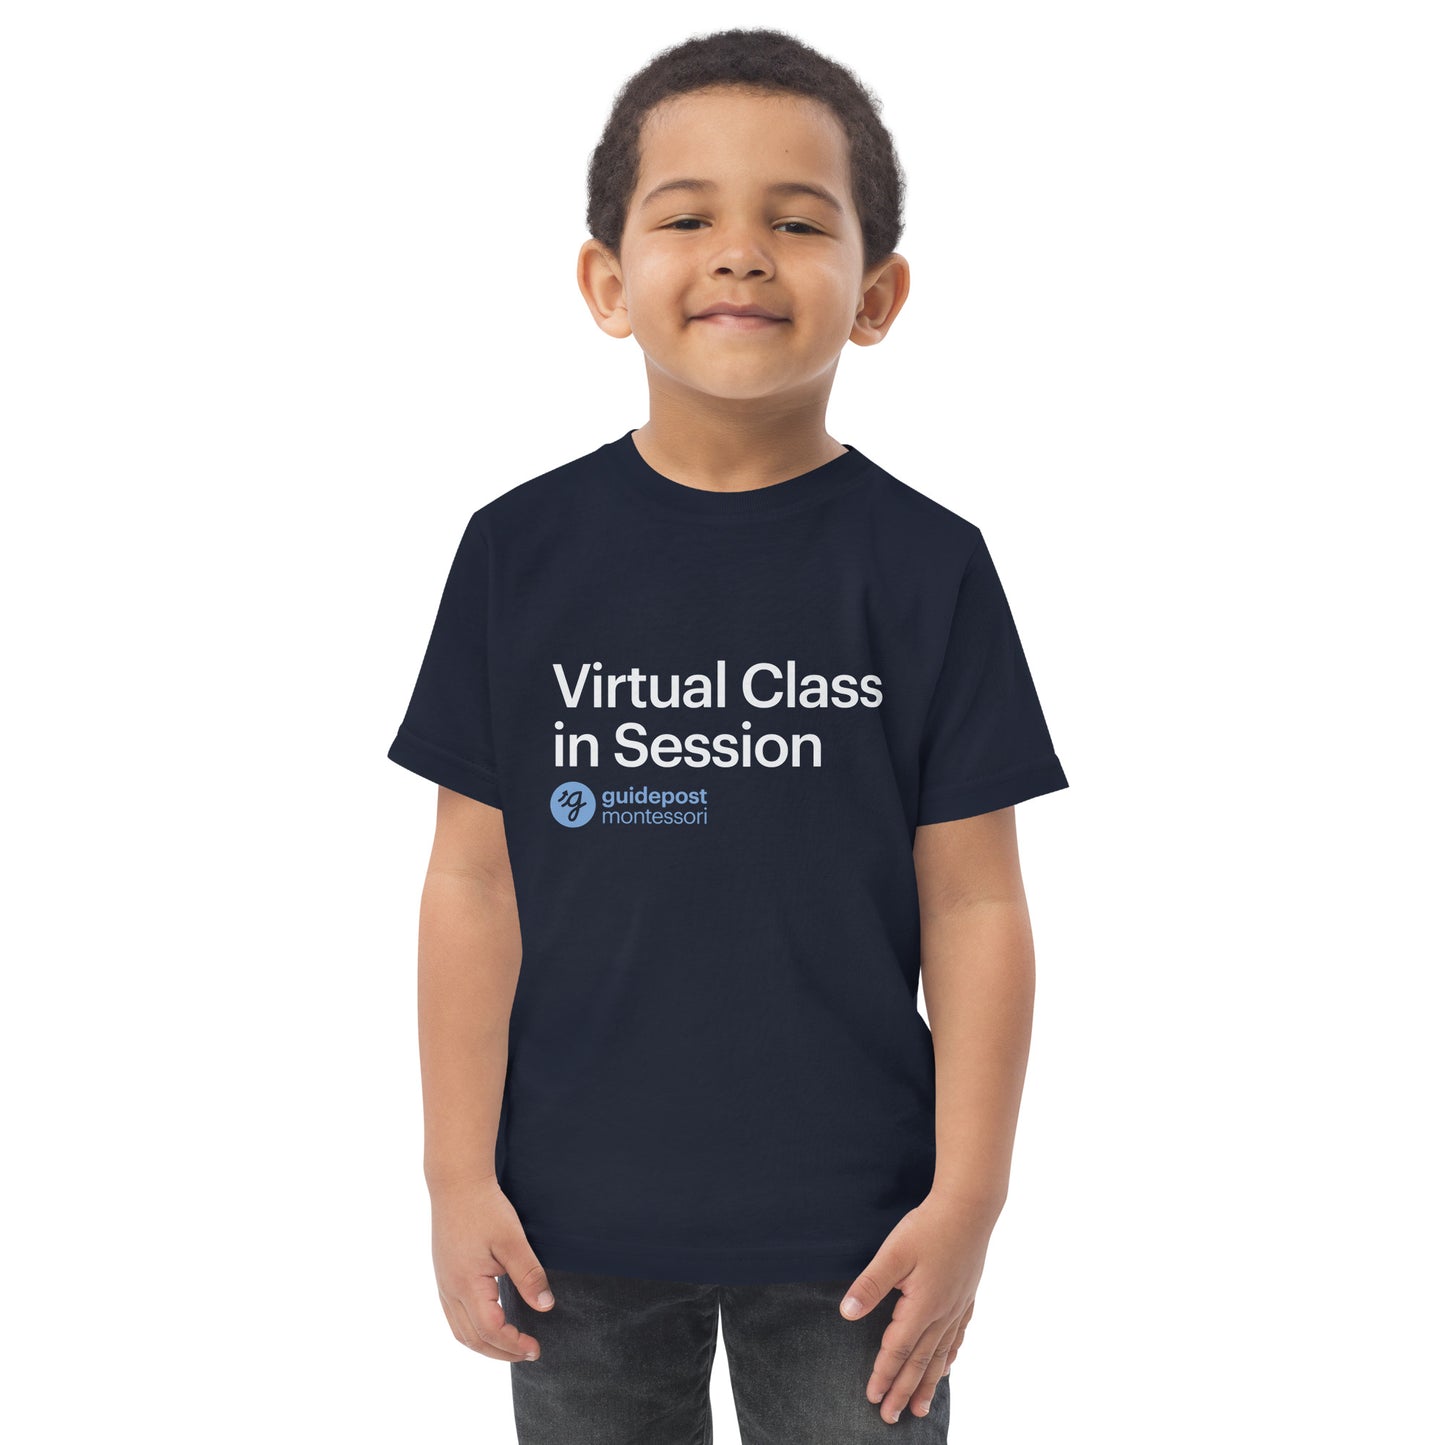 Virtual Class in Session Toddler jersey t-shirt